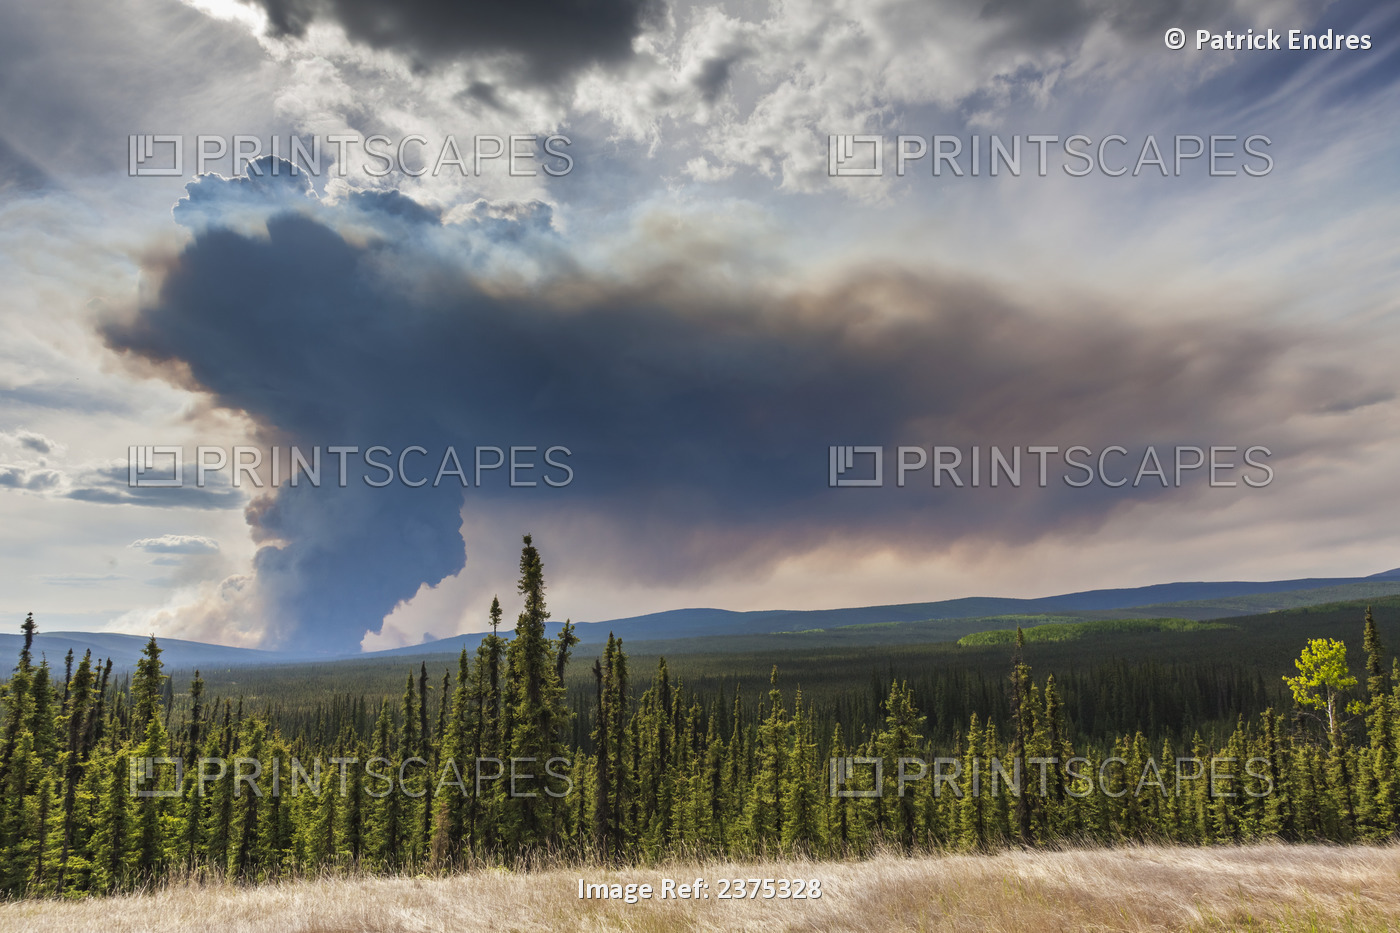 Columns Of Smoke Rise From The Boreal Forest Of Spruce And Hardood Trees In ...